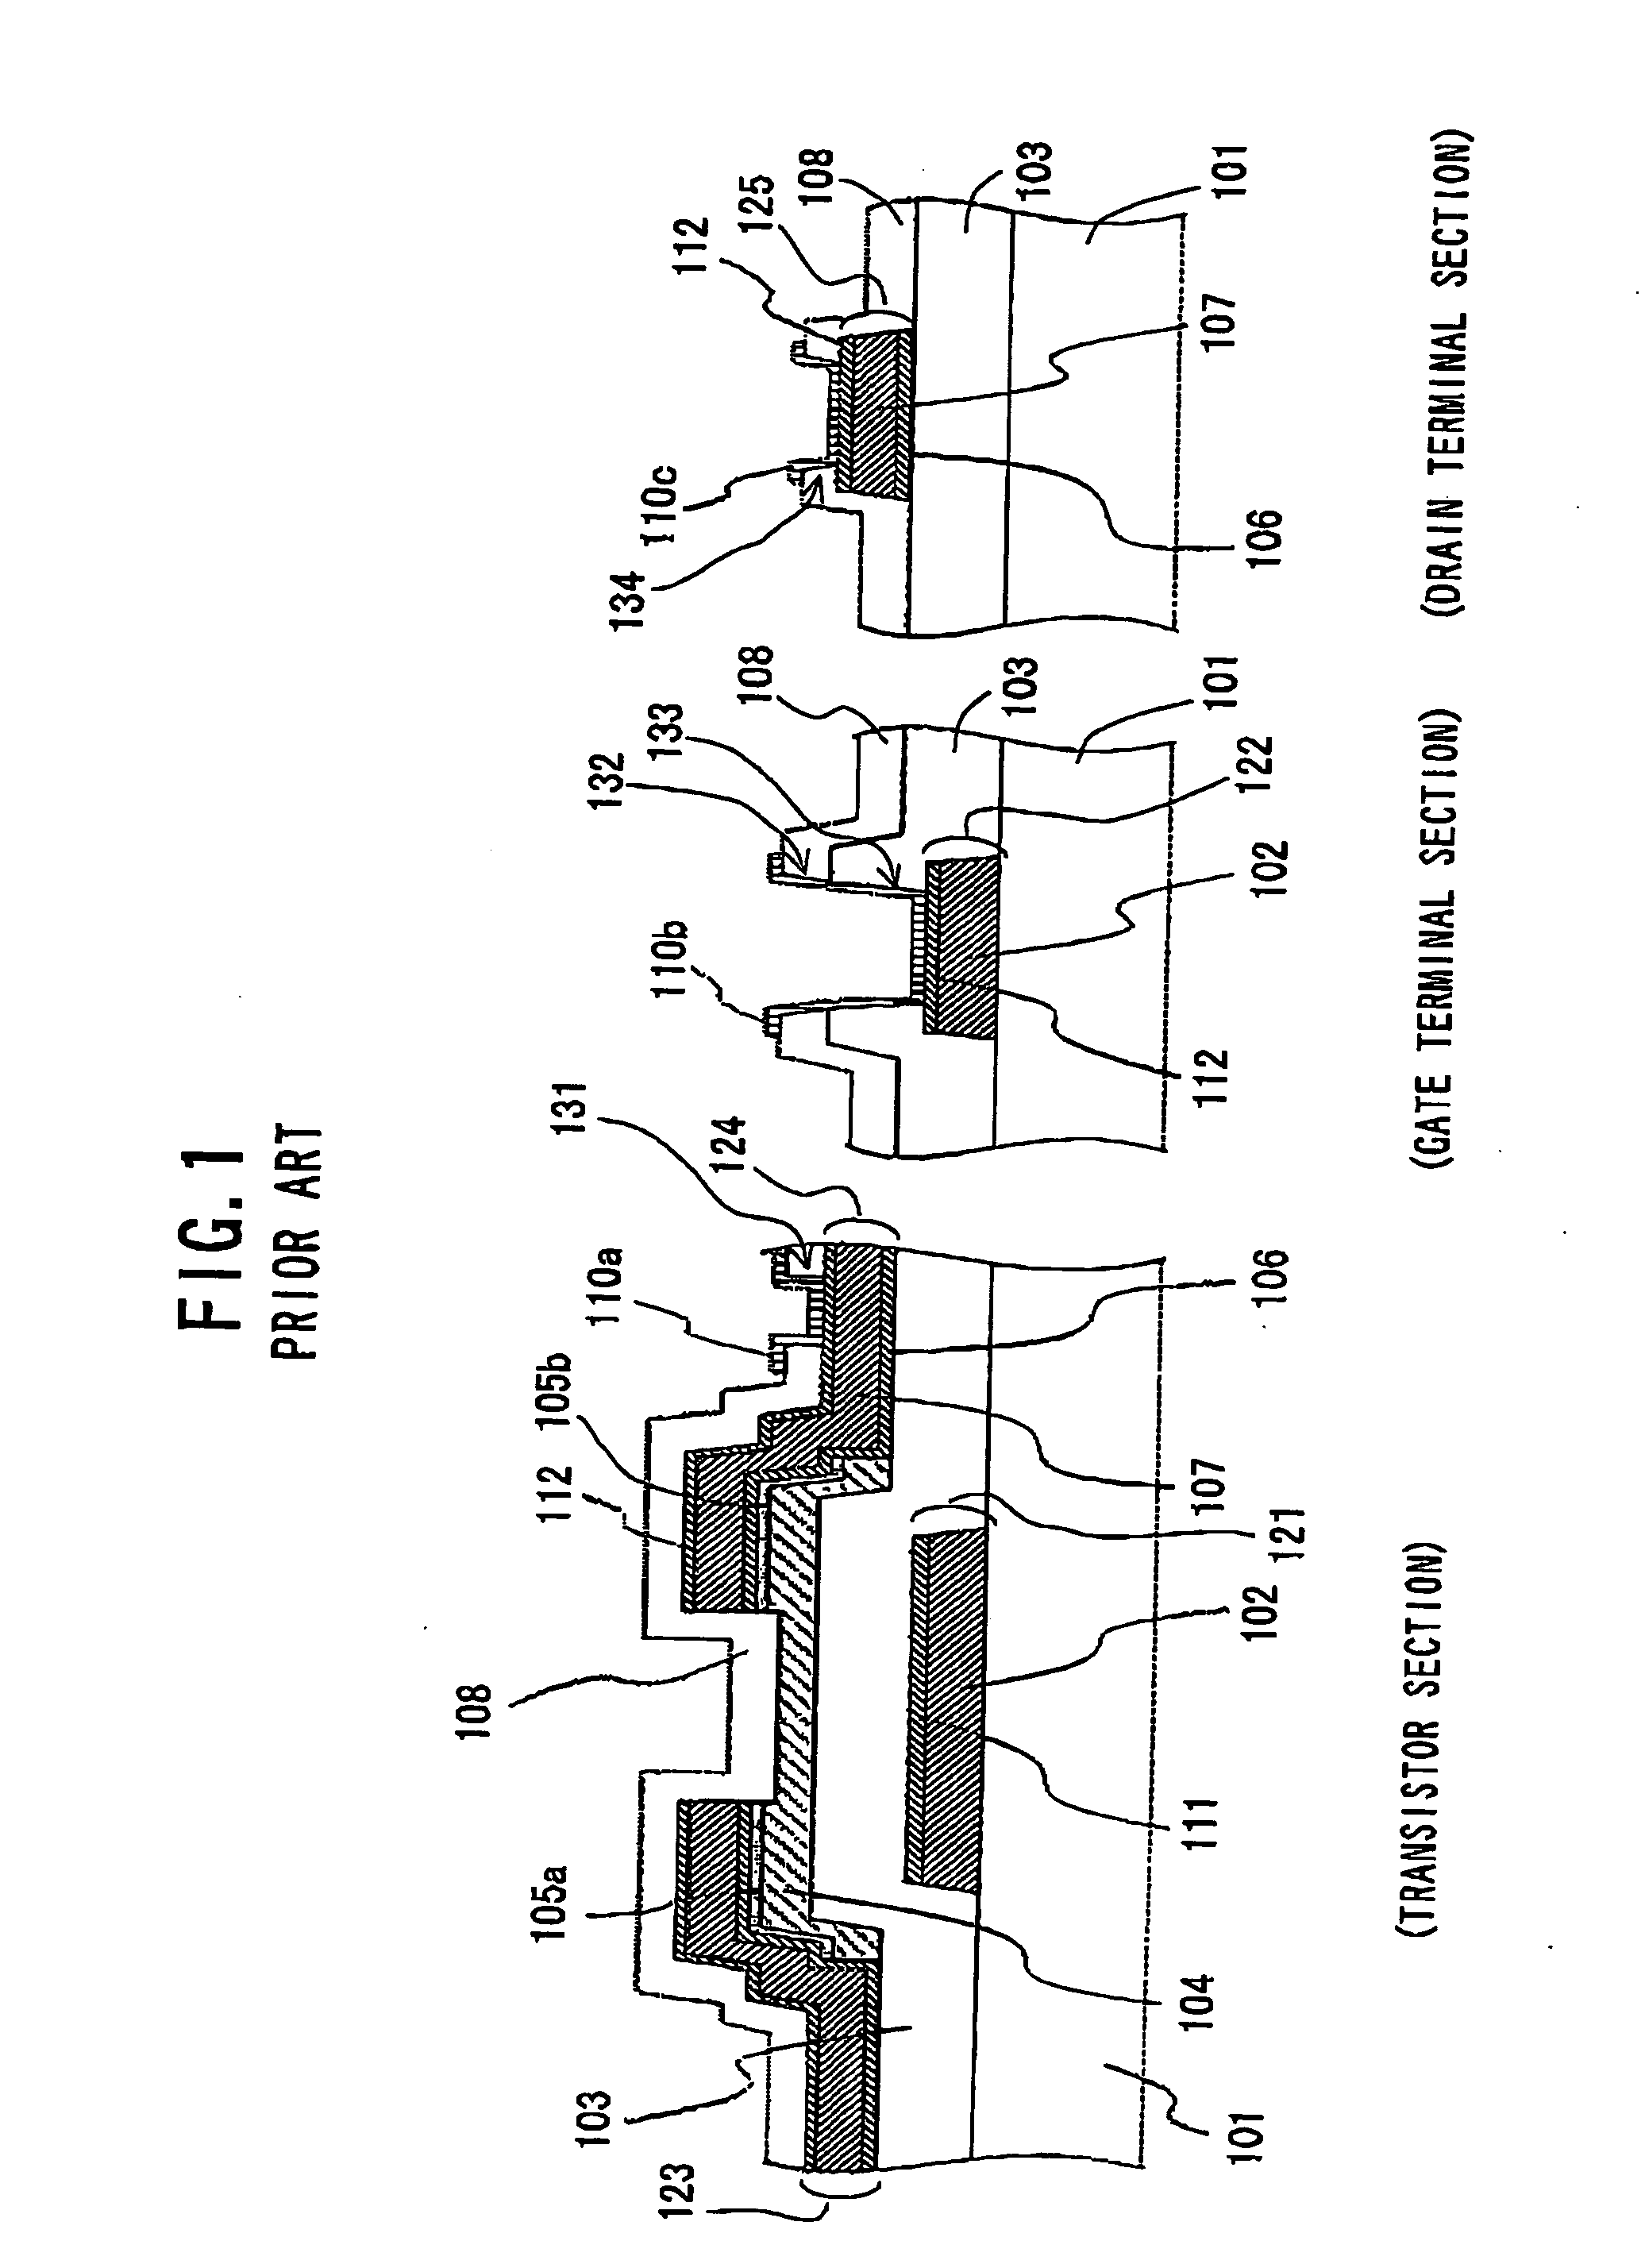 Liquid-crystal display device with thin-film transistors and method of fabricating the same